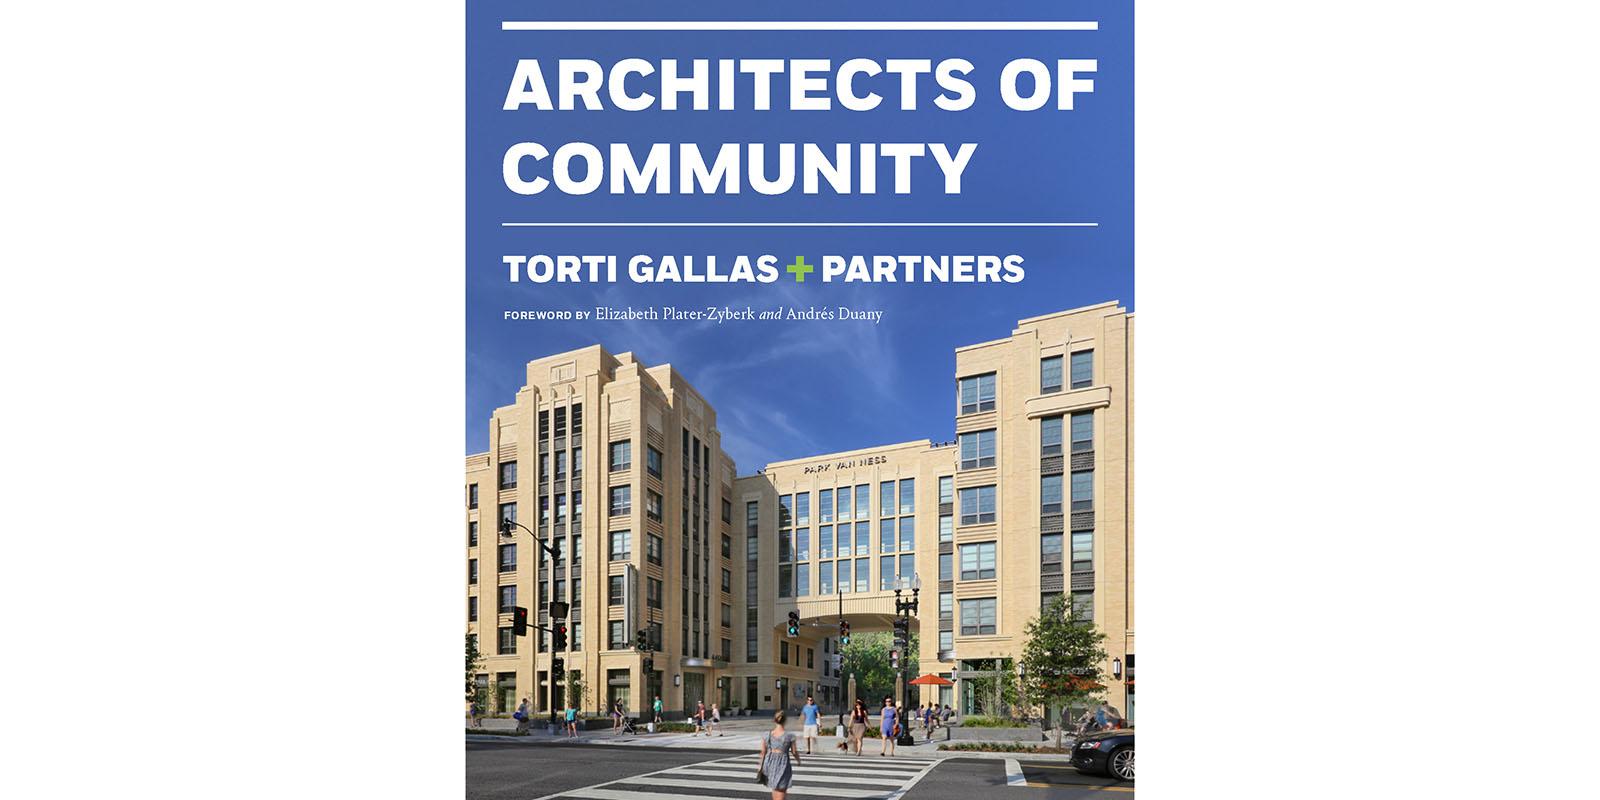 Architects of Community book cover from Torti Gallas + Partners. Image of two buildings with a bridge connecting them and people walking on the street.